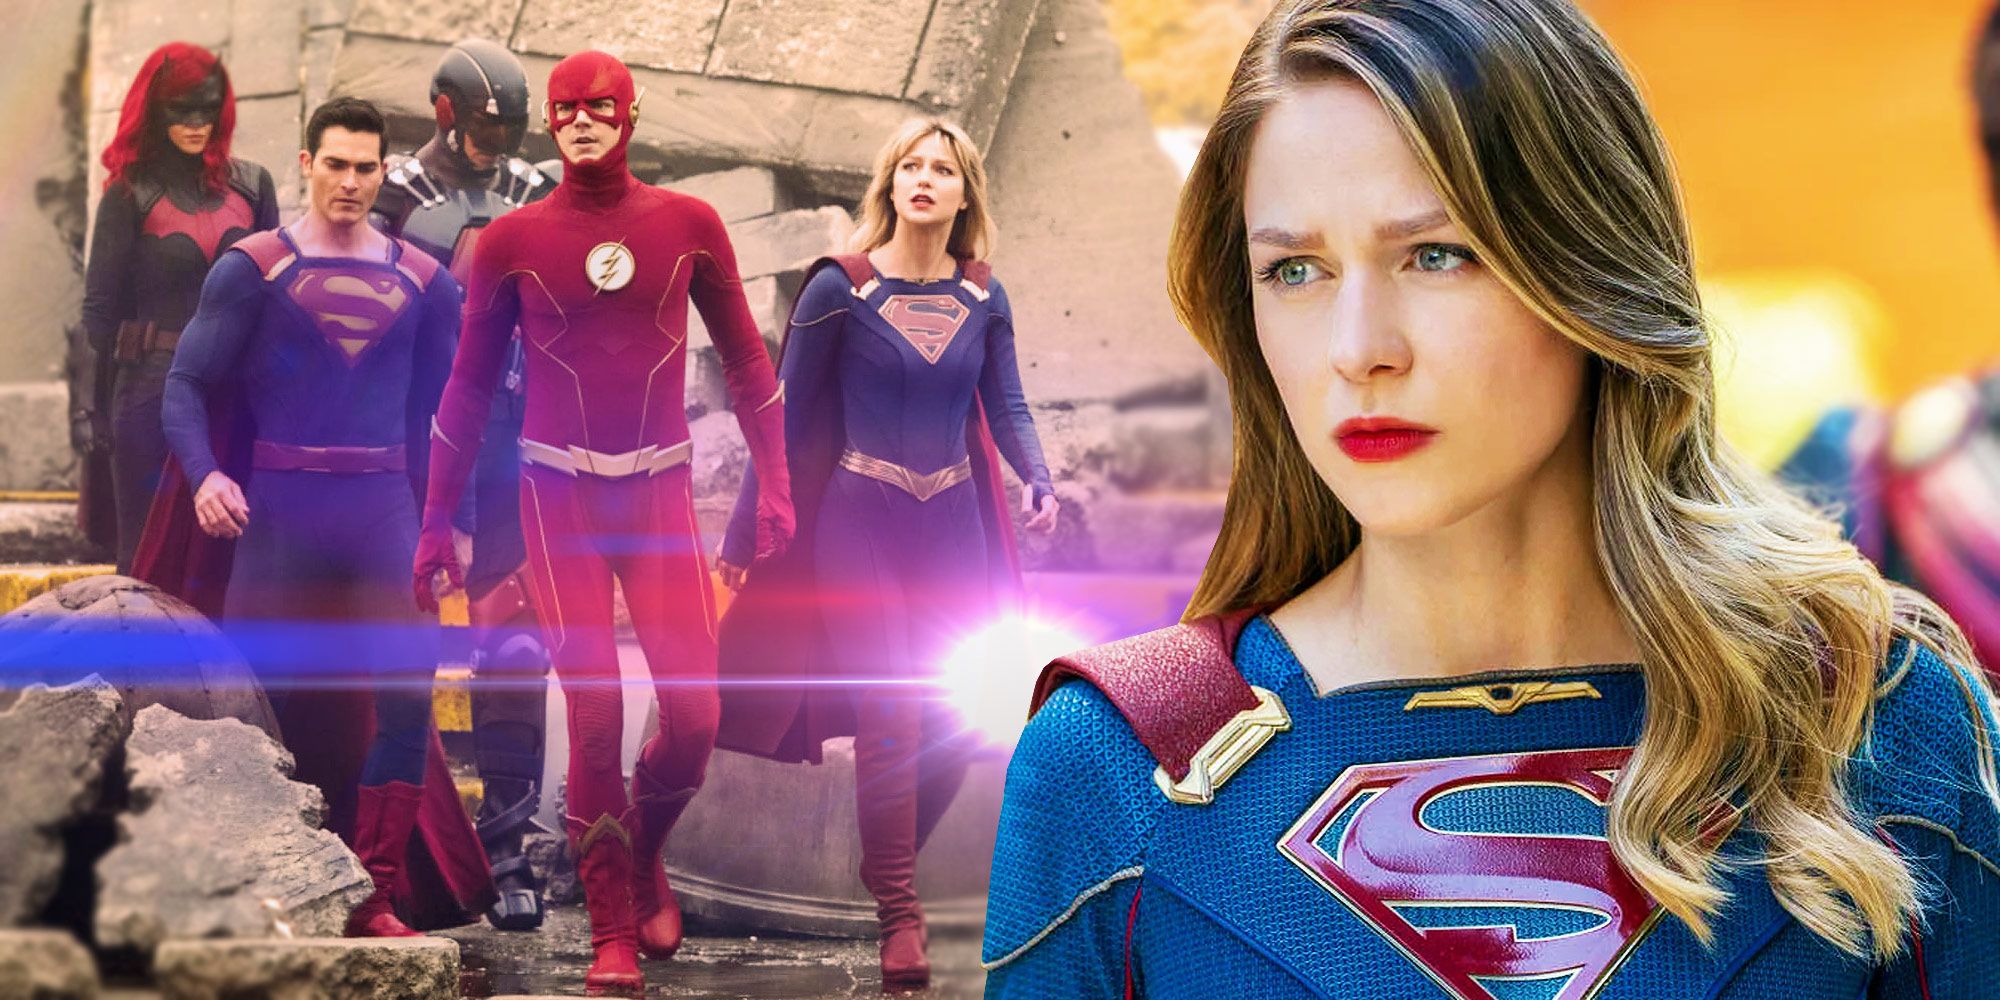 Supergirl Season 7 latest Release Date and Plot!